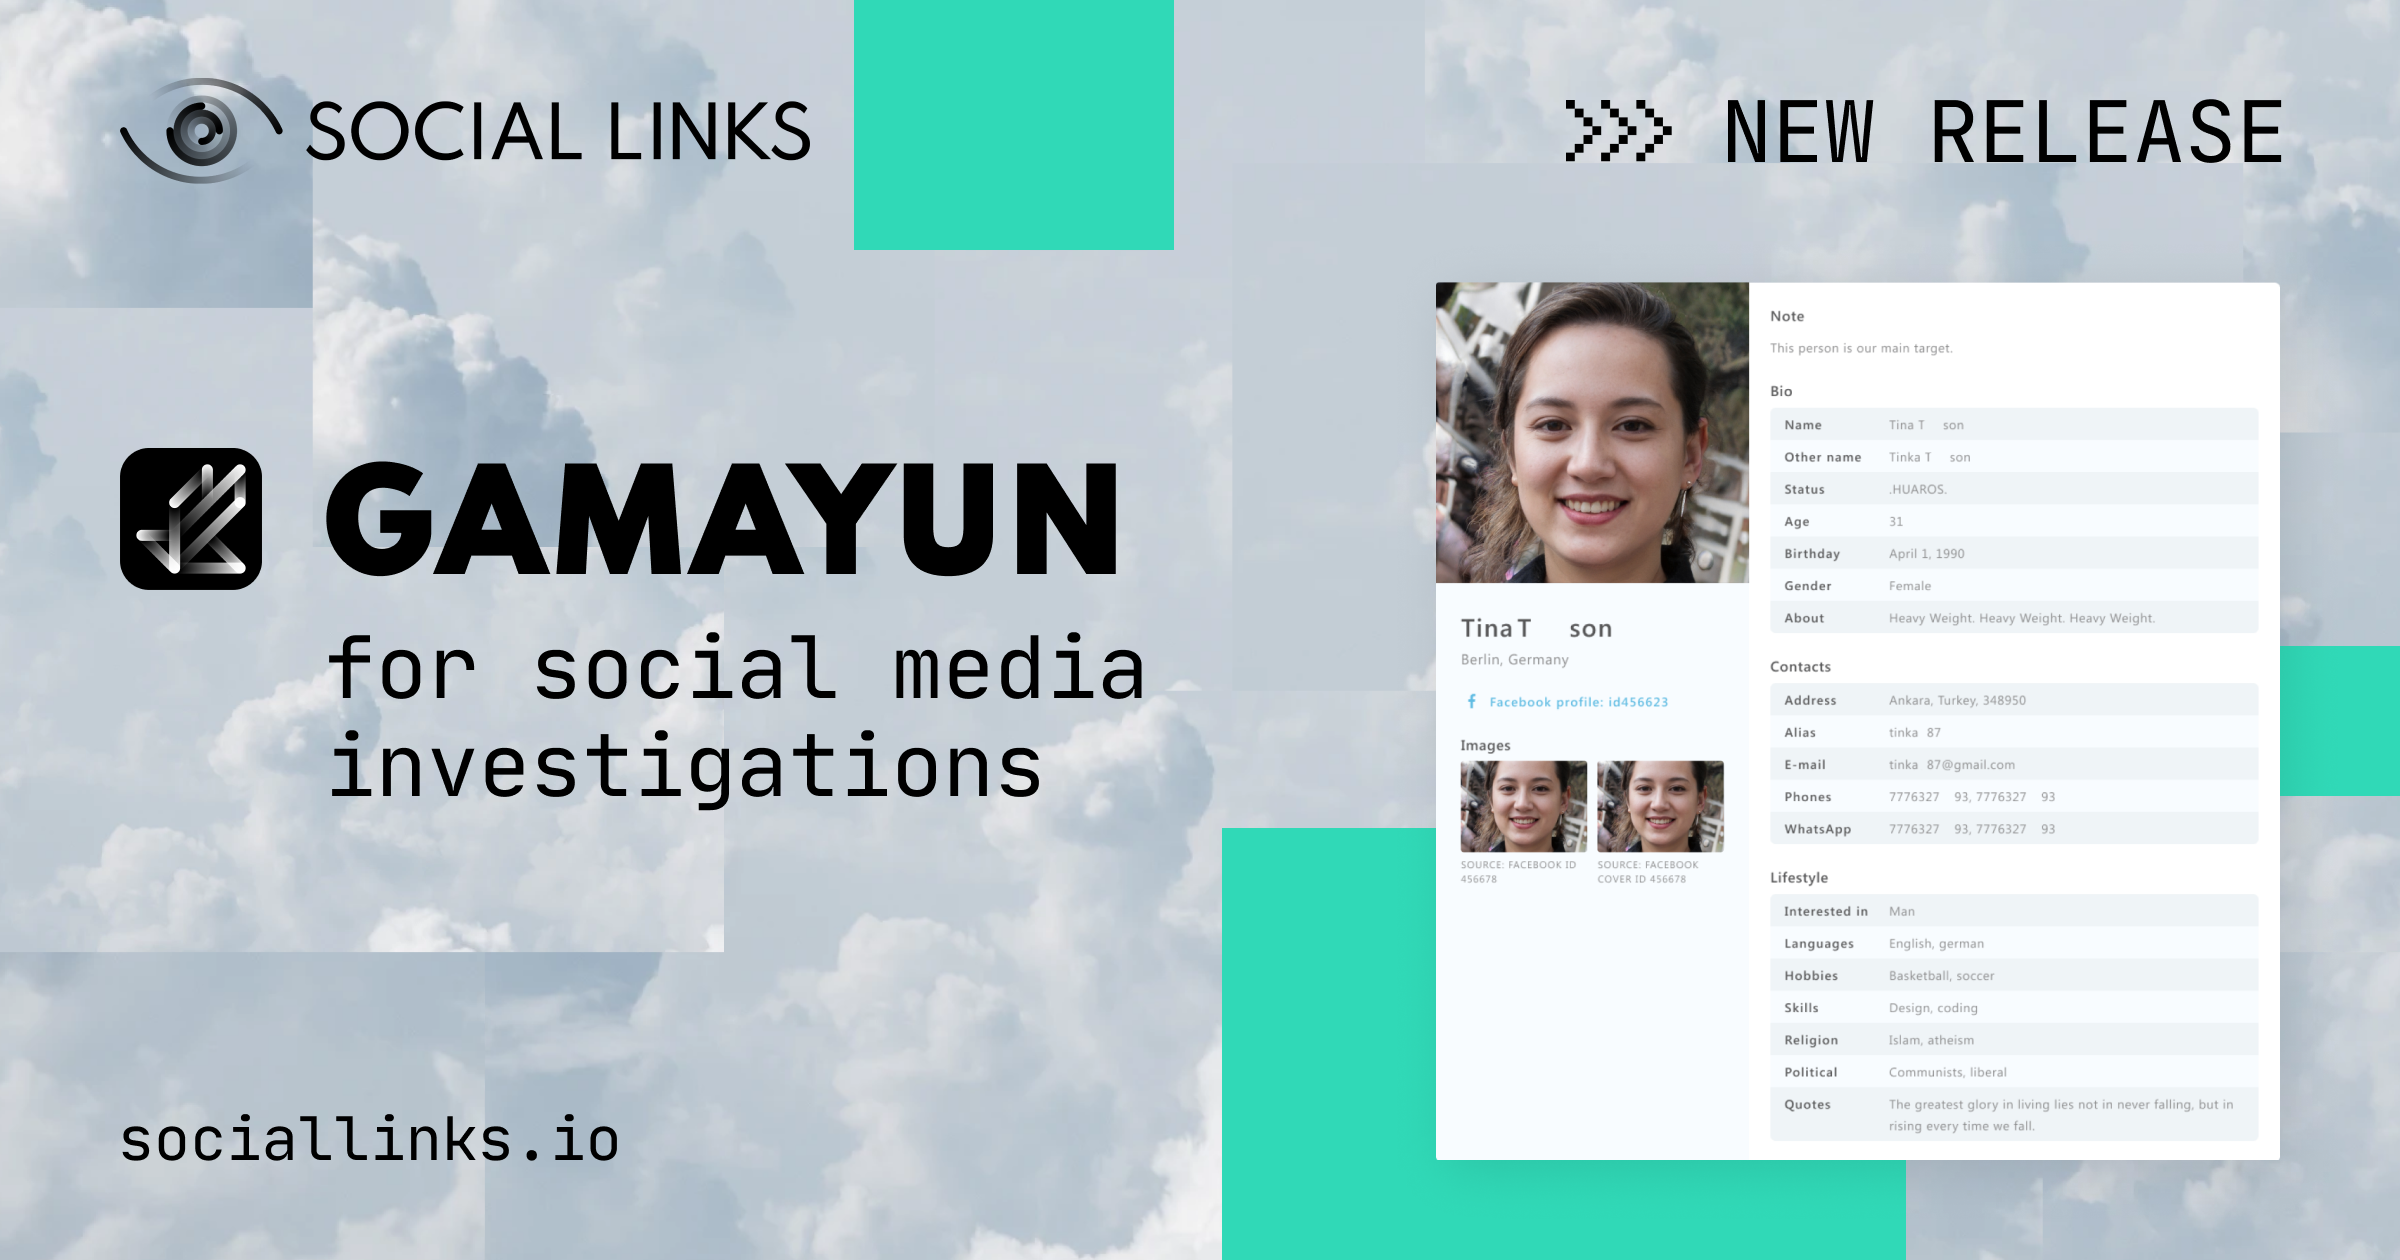 Social Links delivers Gamayun: a web-based product for open-source investigations